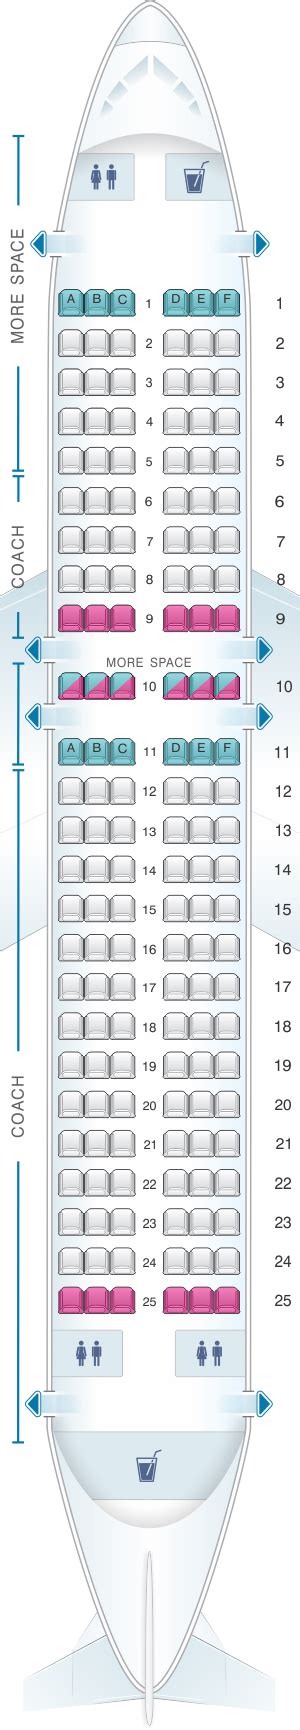 Jetblue plane seat layout. Read user reviews for United Boeing 777-200 (772) Layout 5. Submitted by SeatGuru User on 2020/02/04 for Seat 7D. Avoid any middle row seats in aisles 7 and 8. There is a ceiling vent that blasts cold air from the galley above these two rows and the crew cannot turn it off. I was freezing during an 11 hour flight. 